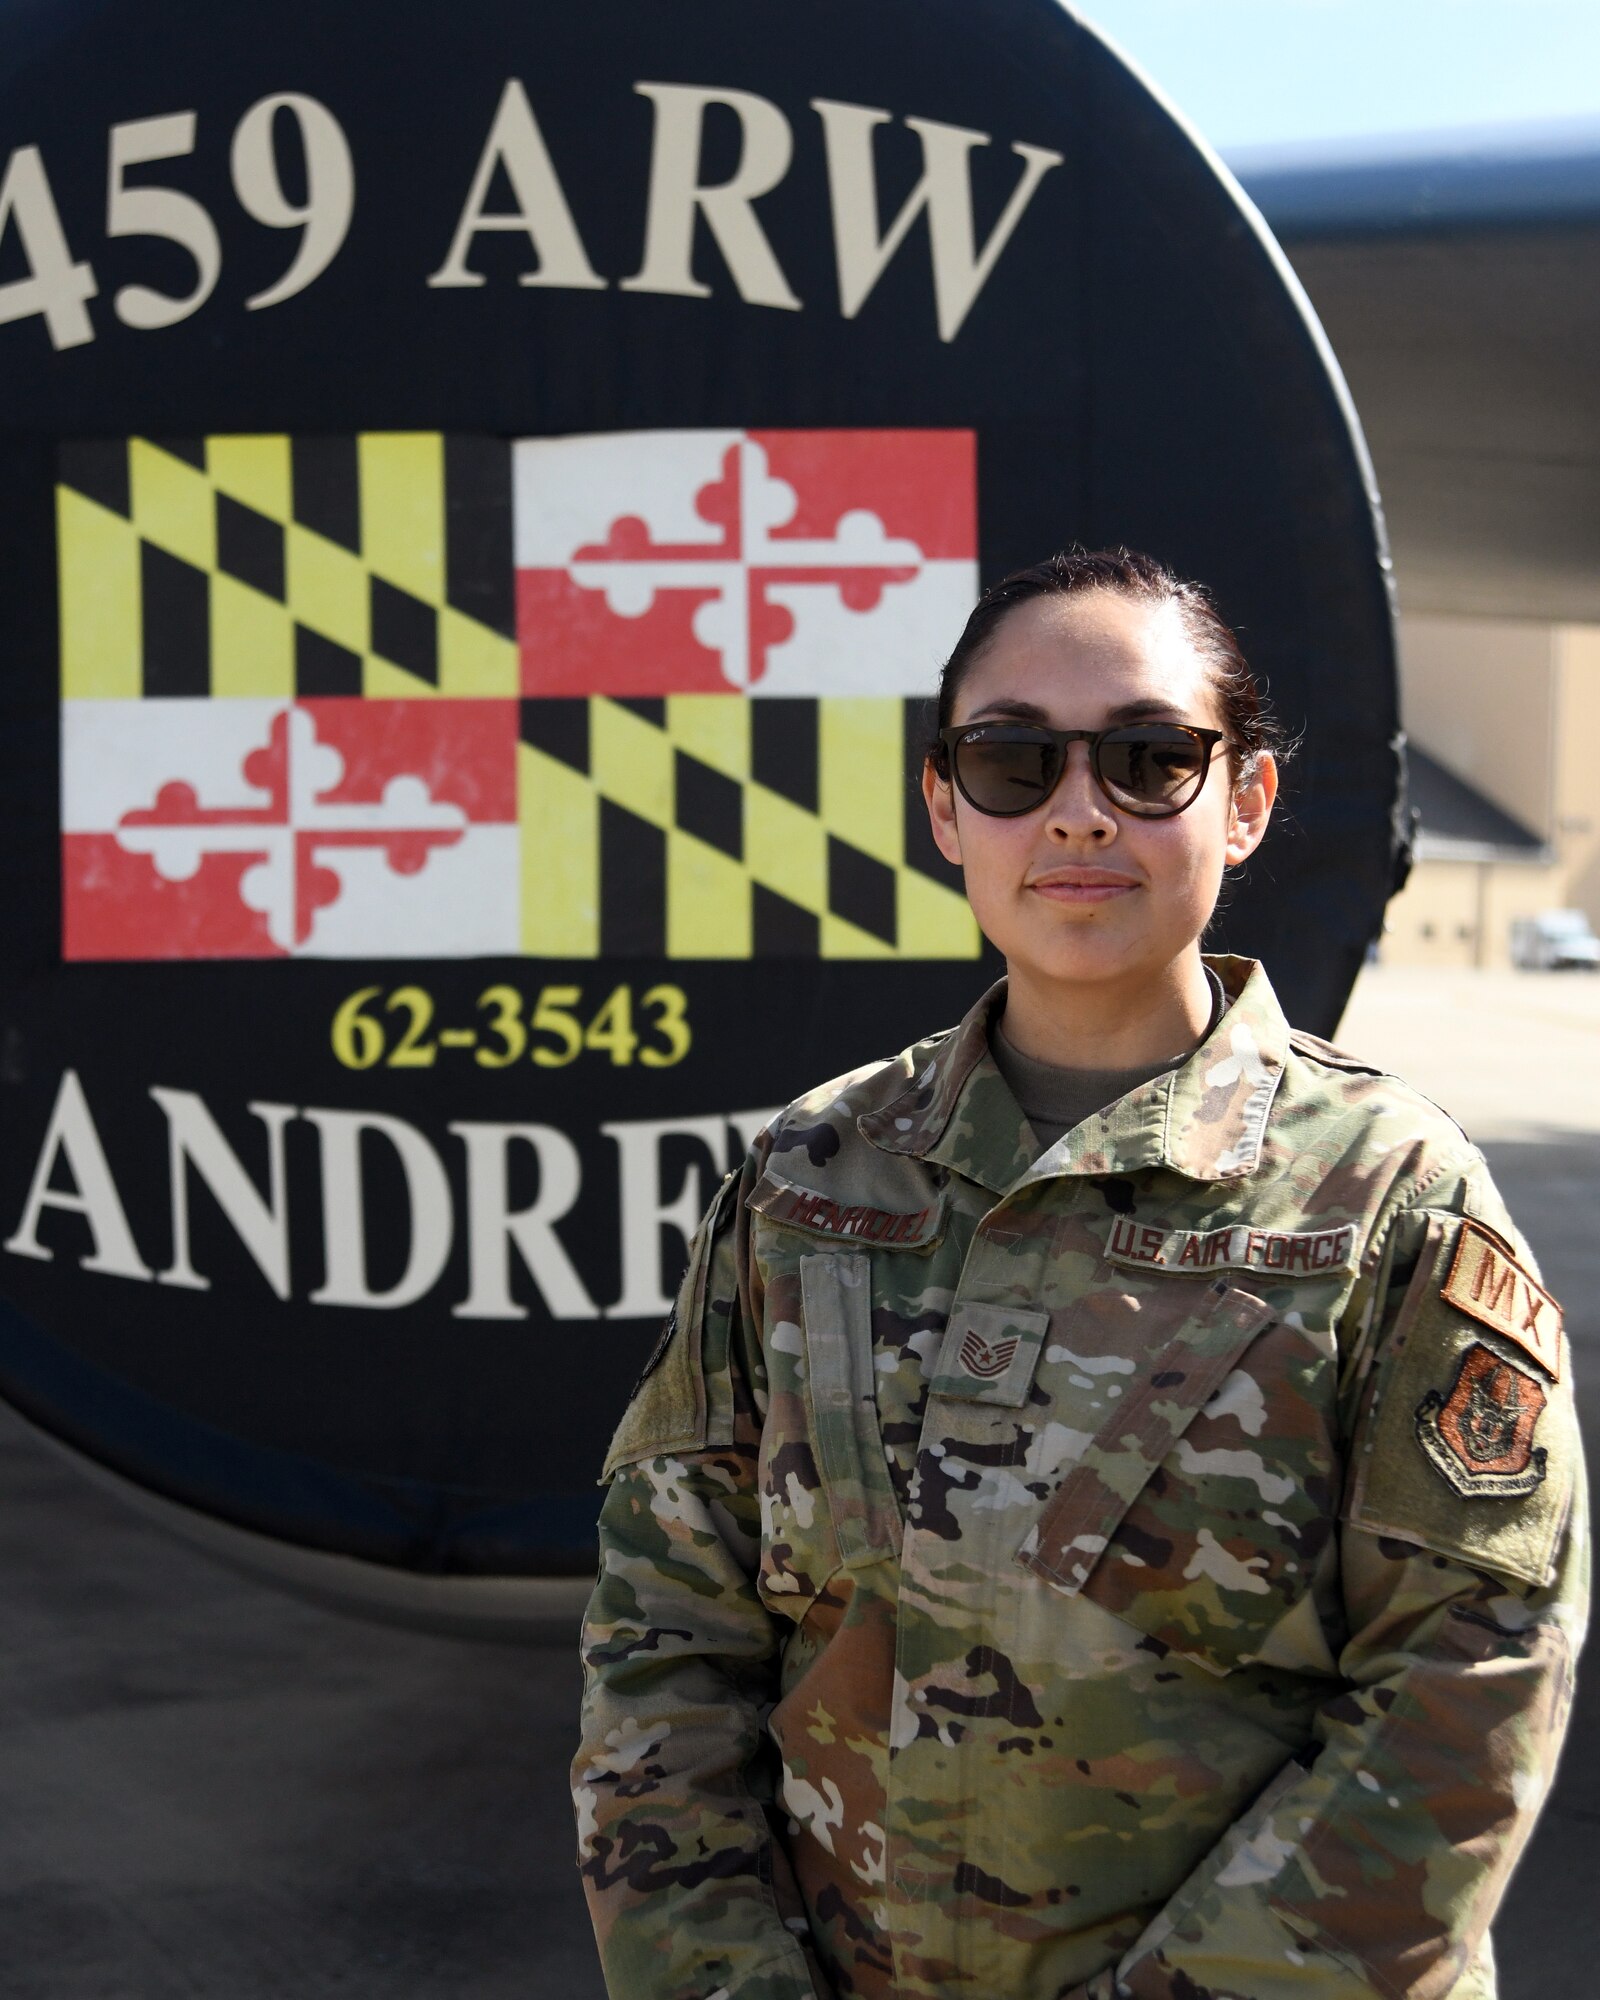 U.S. Air Force Tech Sgt. Sandra Henriquez, 459th Maintenance Squadron, aero repair technician, poses for a photo Oct. 14, 2021, at Joint Base Andrews, Md. Henriquez reflects on her Salvadorian heritage during Hispanic Heritage month which is observed from Sep 15 – Oct 15. (U.S. Air Force photo by Staff Sgt. Cierra Presentado/Released)